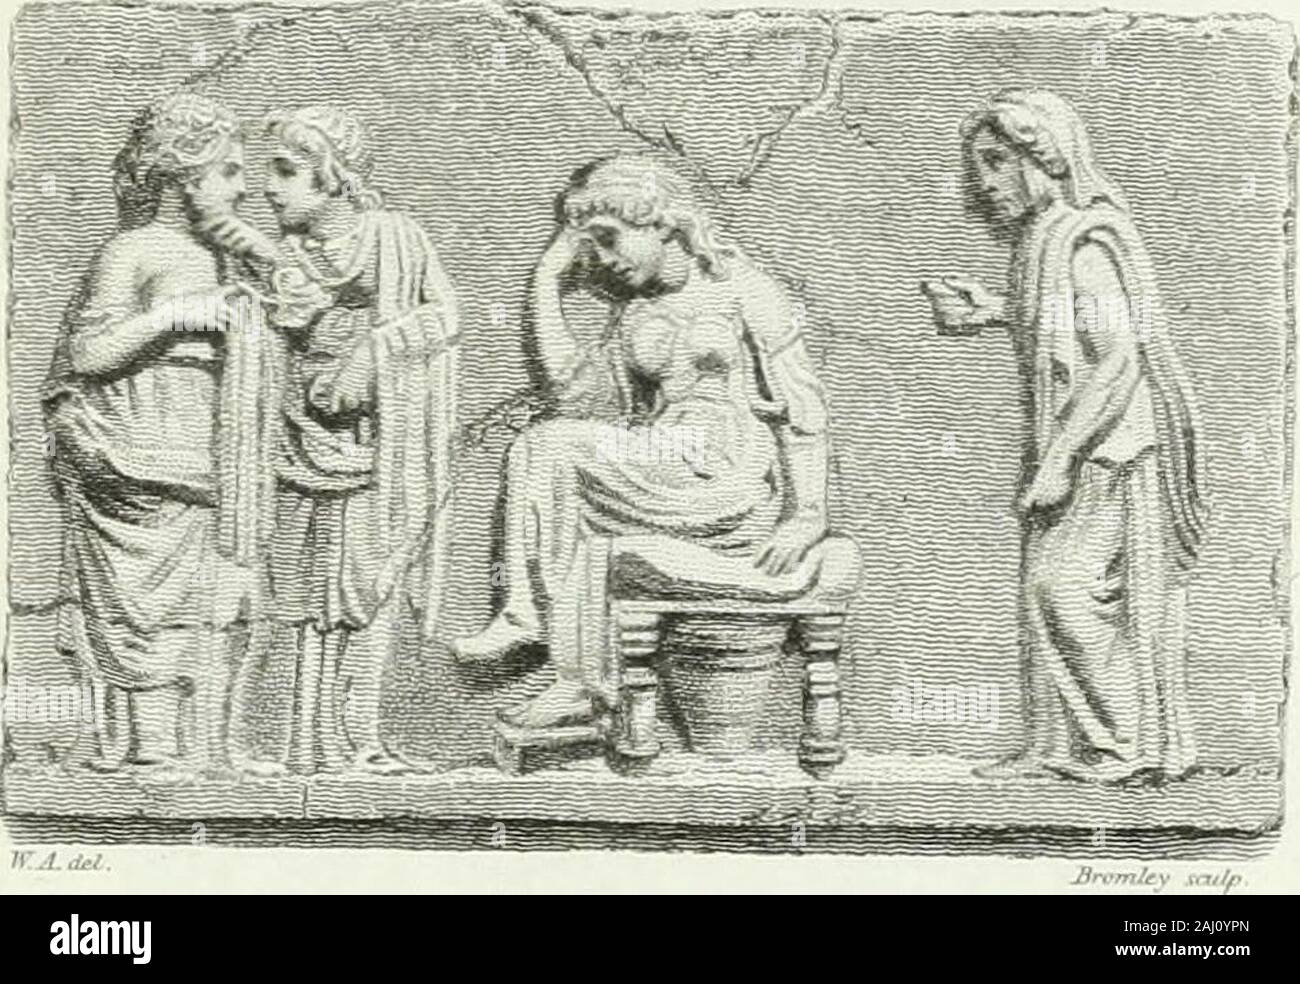 A description of the collection of ancient terracottas in the British Museum : with engravings . Limd.»i I^hb.ih.^J..Tum jo^.iLo.lv tA^ Truste/S ort/u-Mritis/LMuscimt . Plate in.. ^rcntlcs- .unJp. Stock Photo